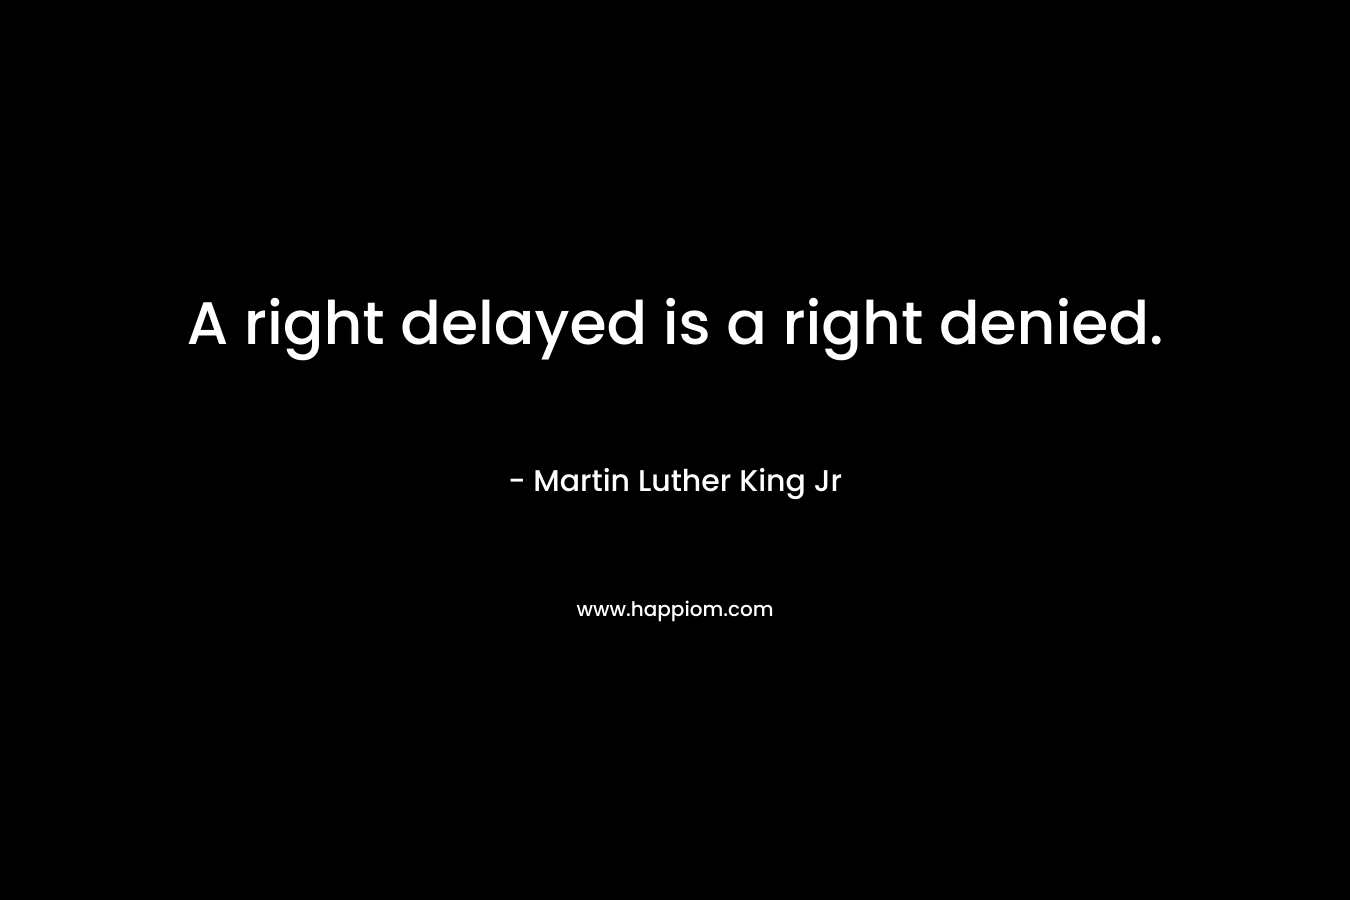 A right delayed is a right denied.